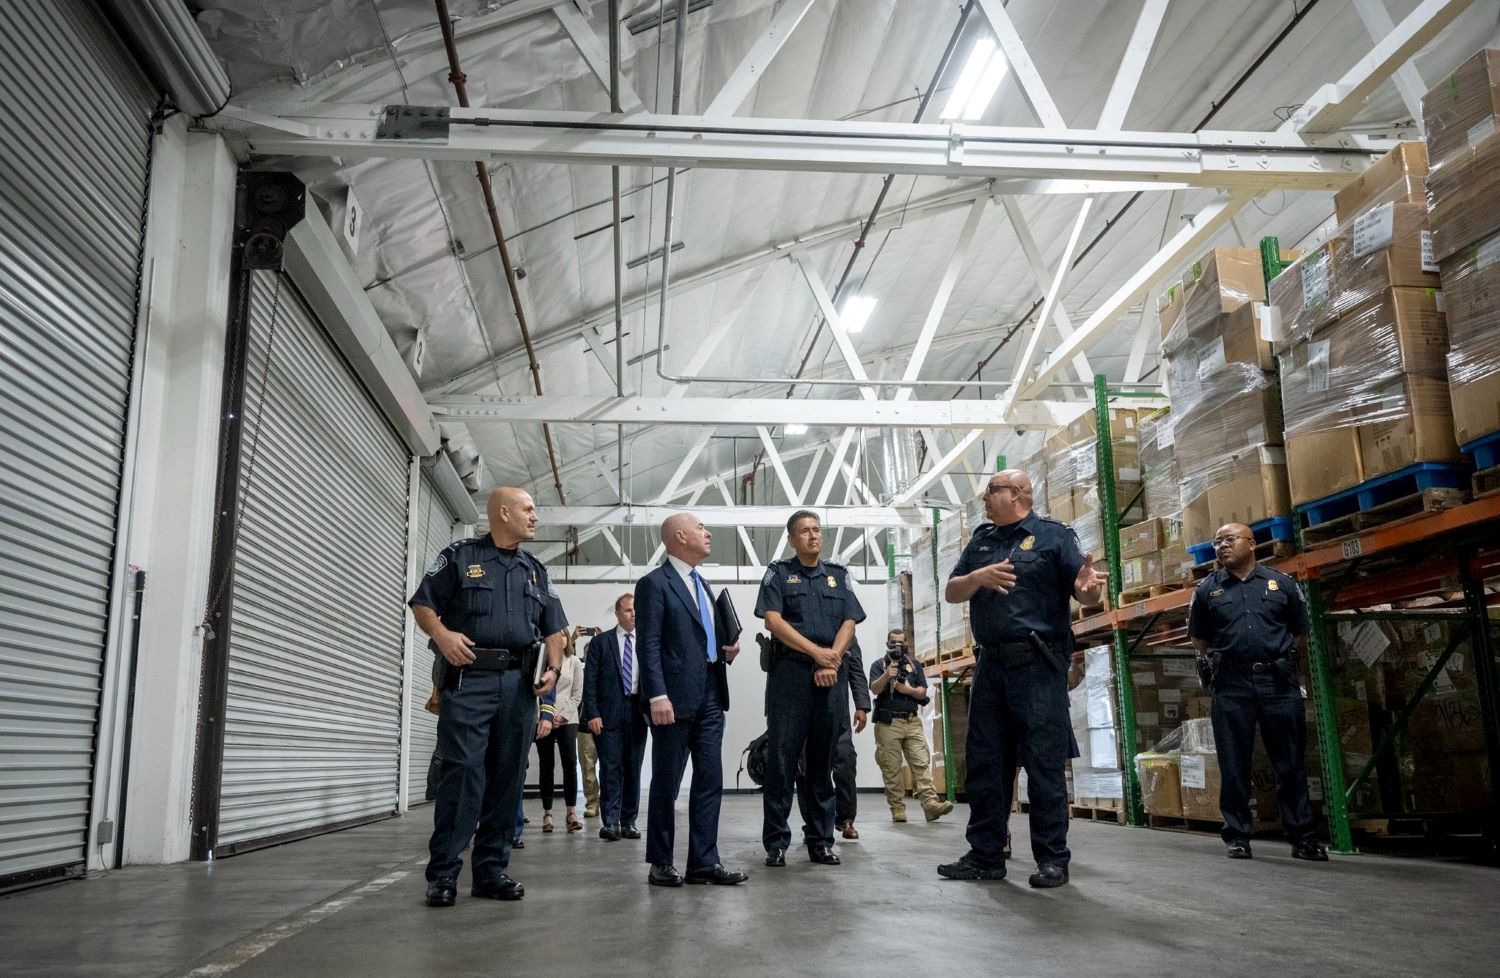 Department of Homeland Security warehouse